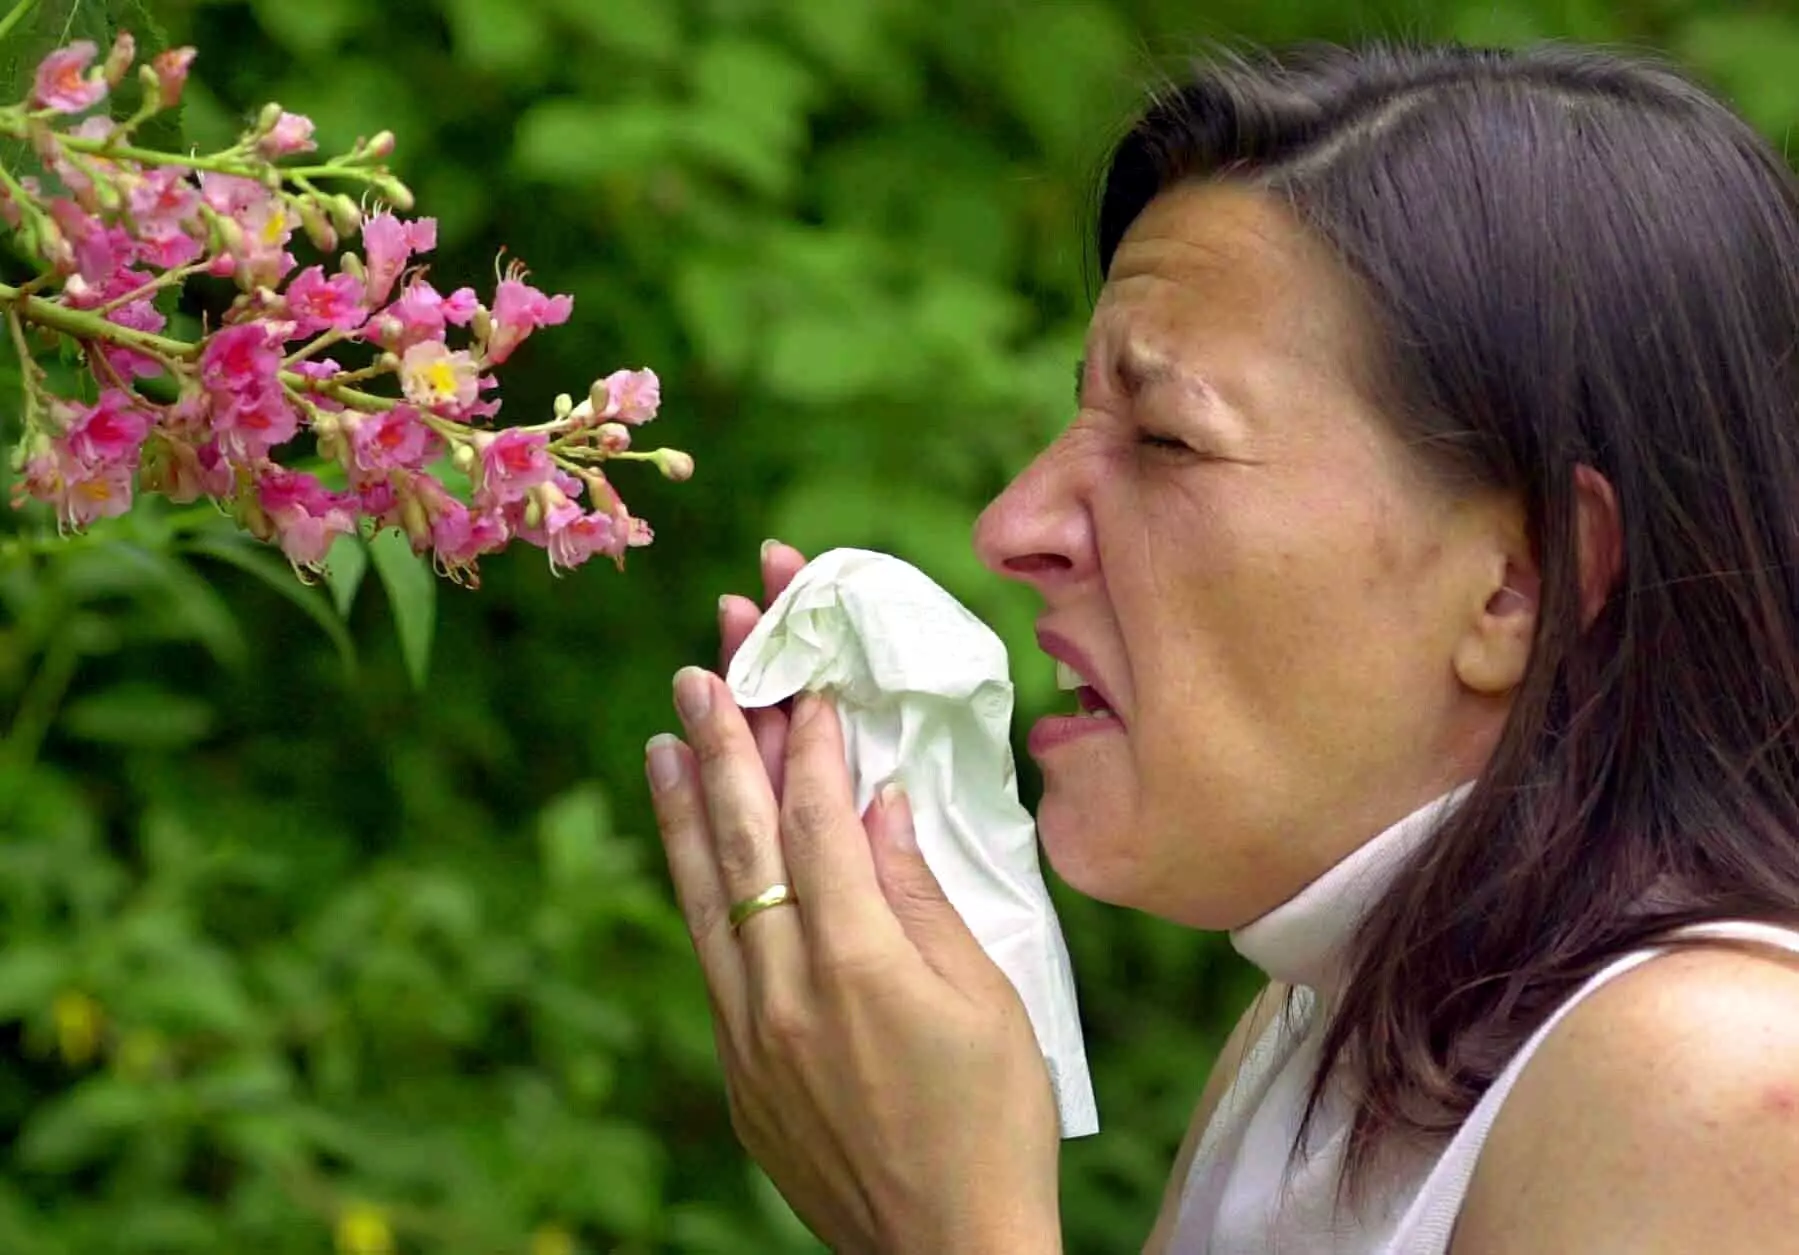 Experts are warning of a 'pollen bomb' set to land on the UK.